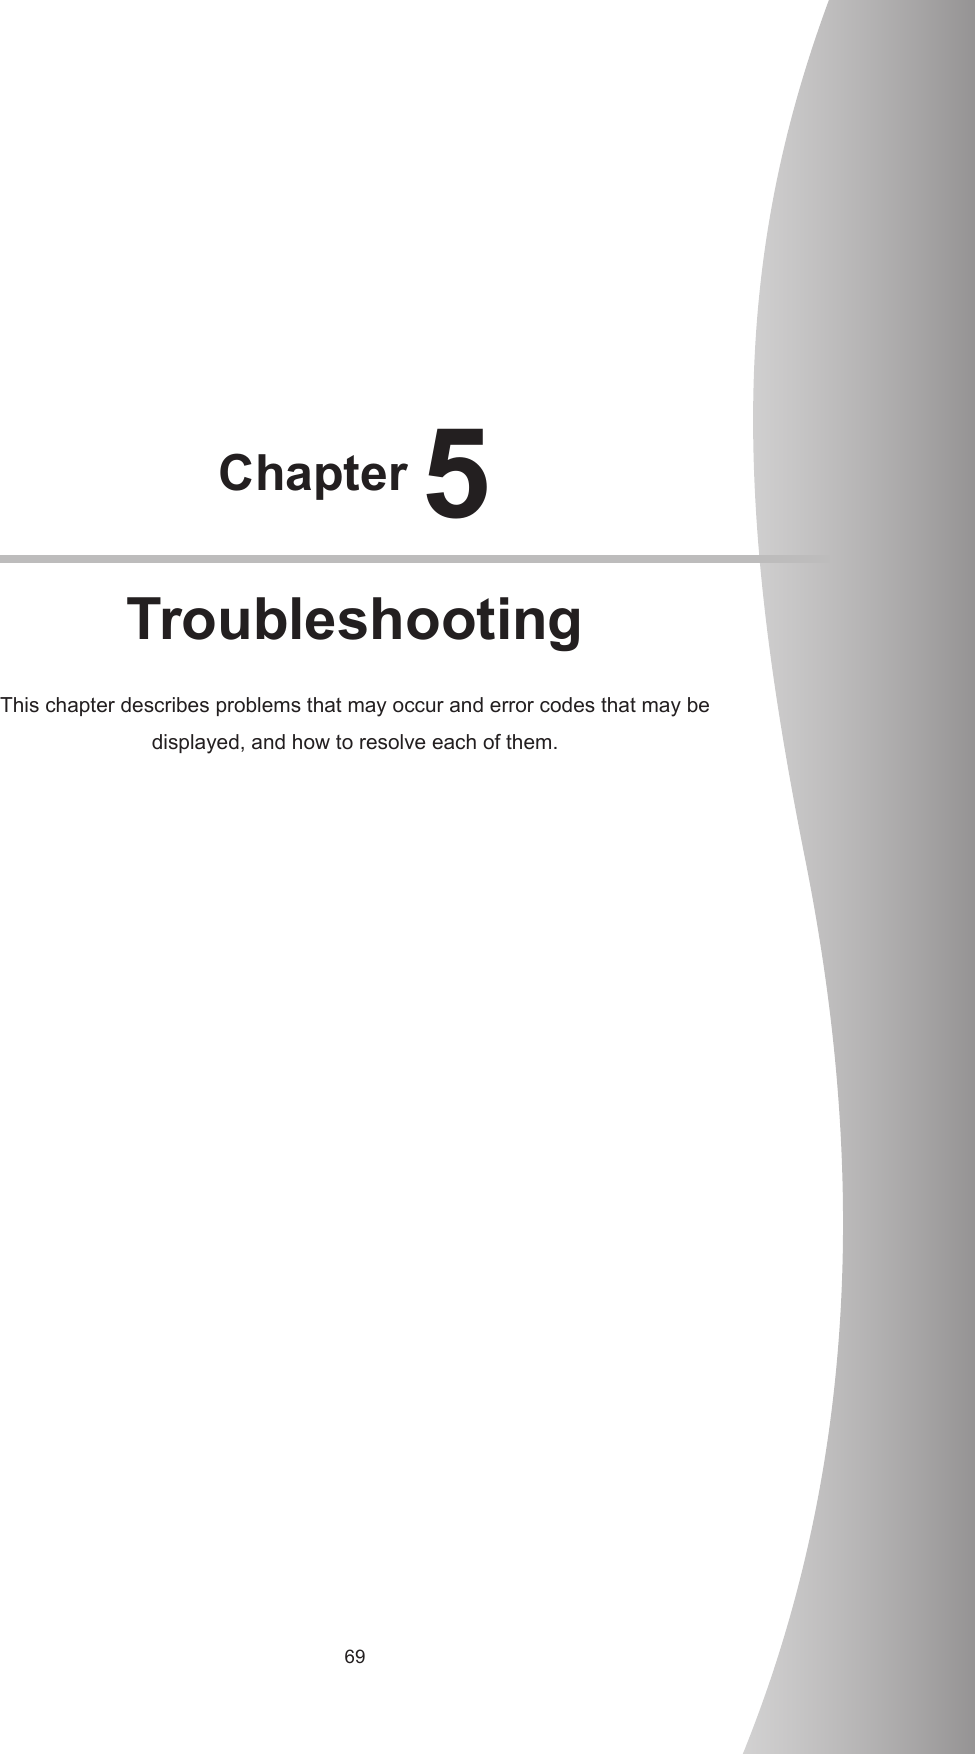 69Chapter 5TroubleshootingThis chapter describes problems that may occur and error codes that may be displayed, and how to resolve each of them.